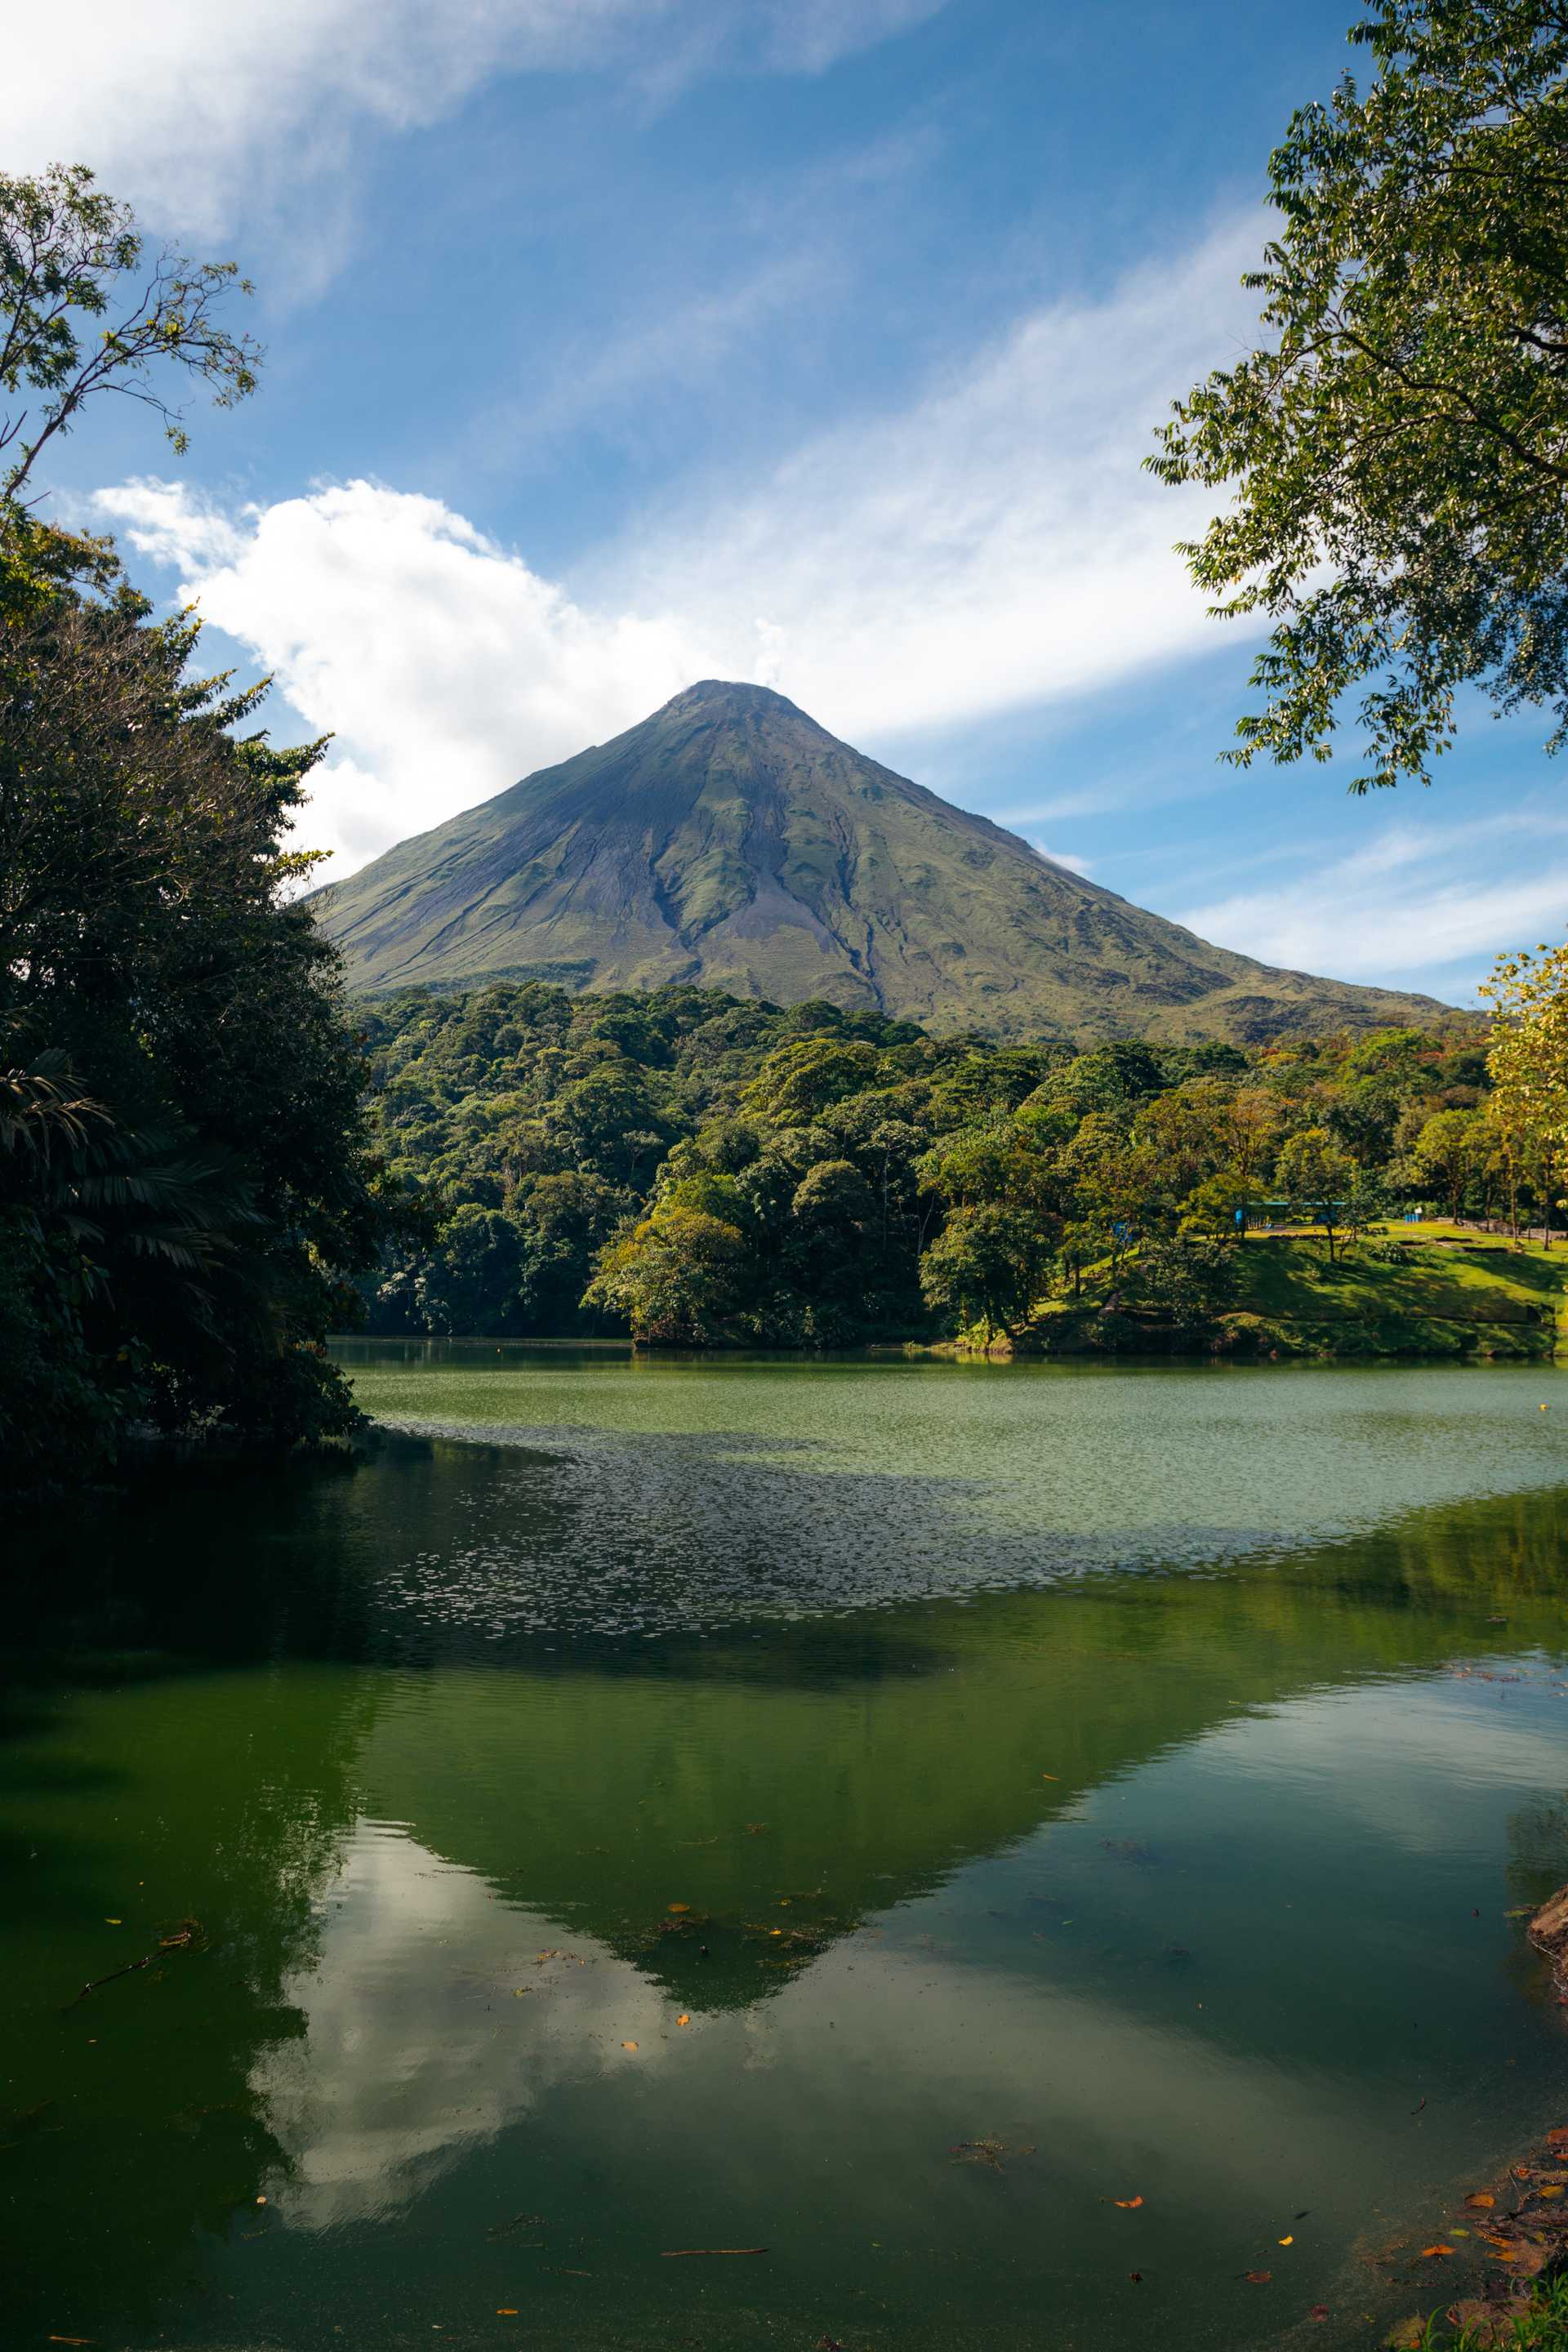 Arenal Volcano from a river surrounded by trees